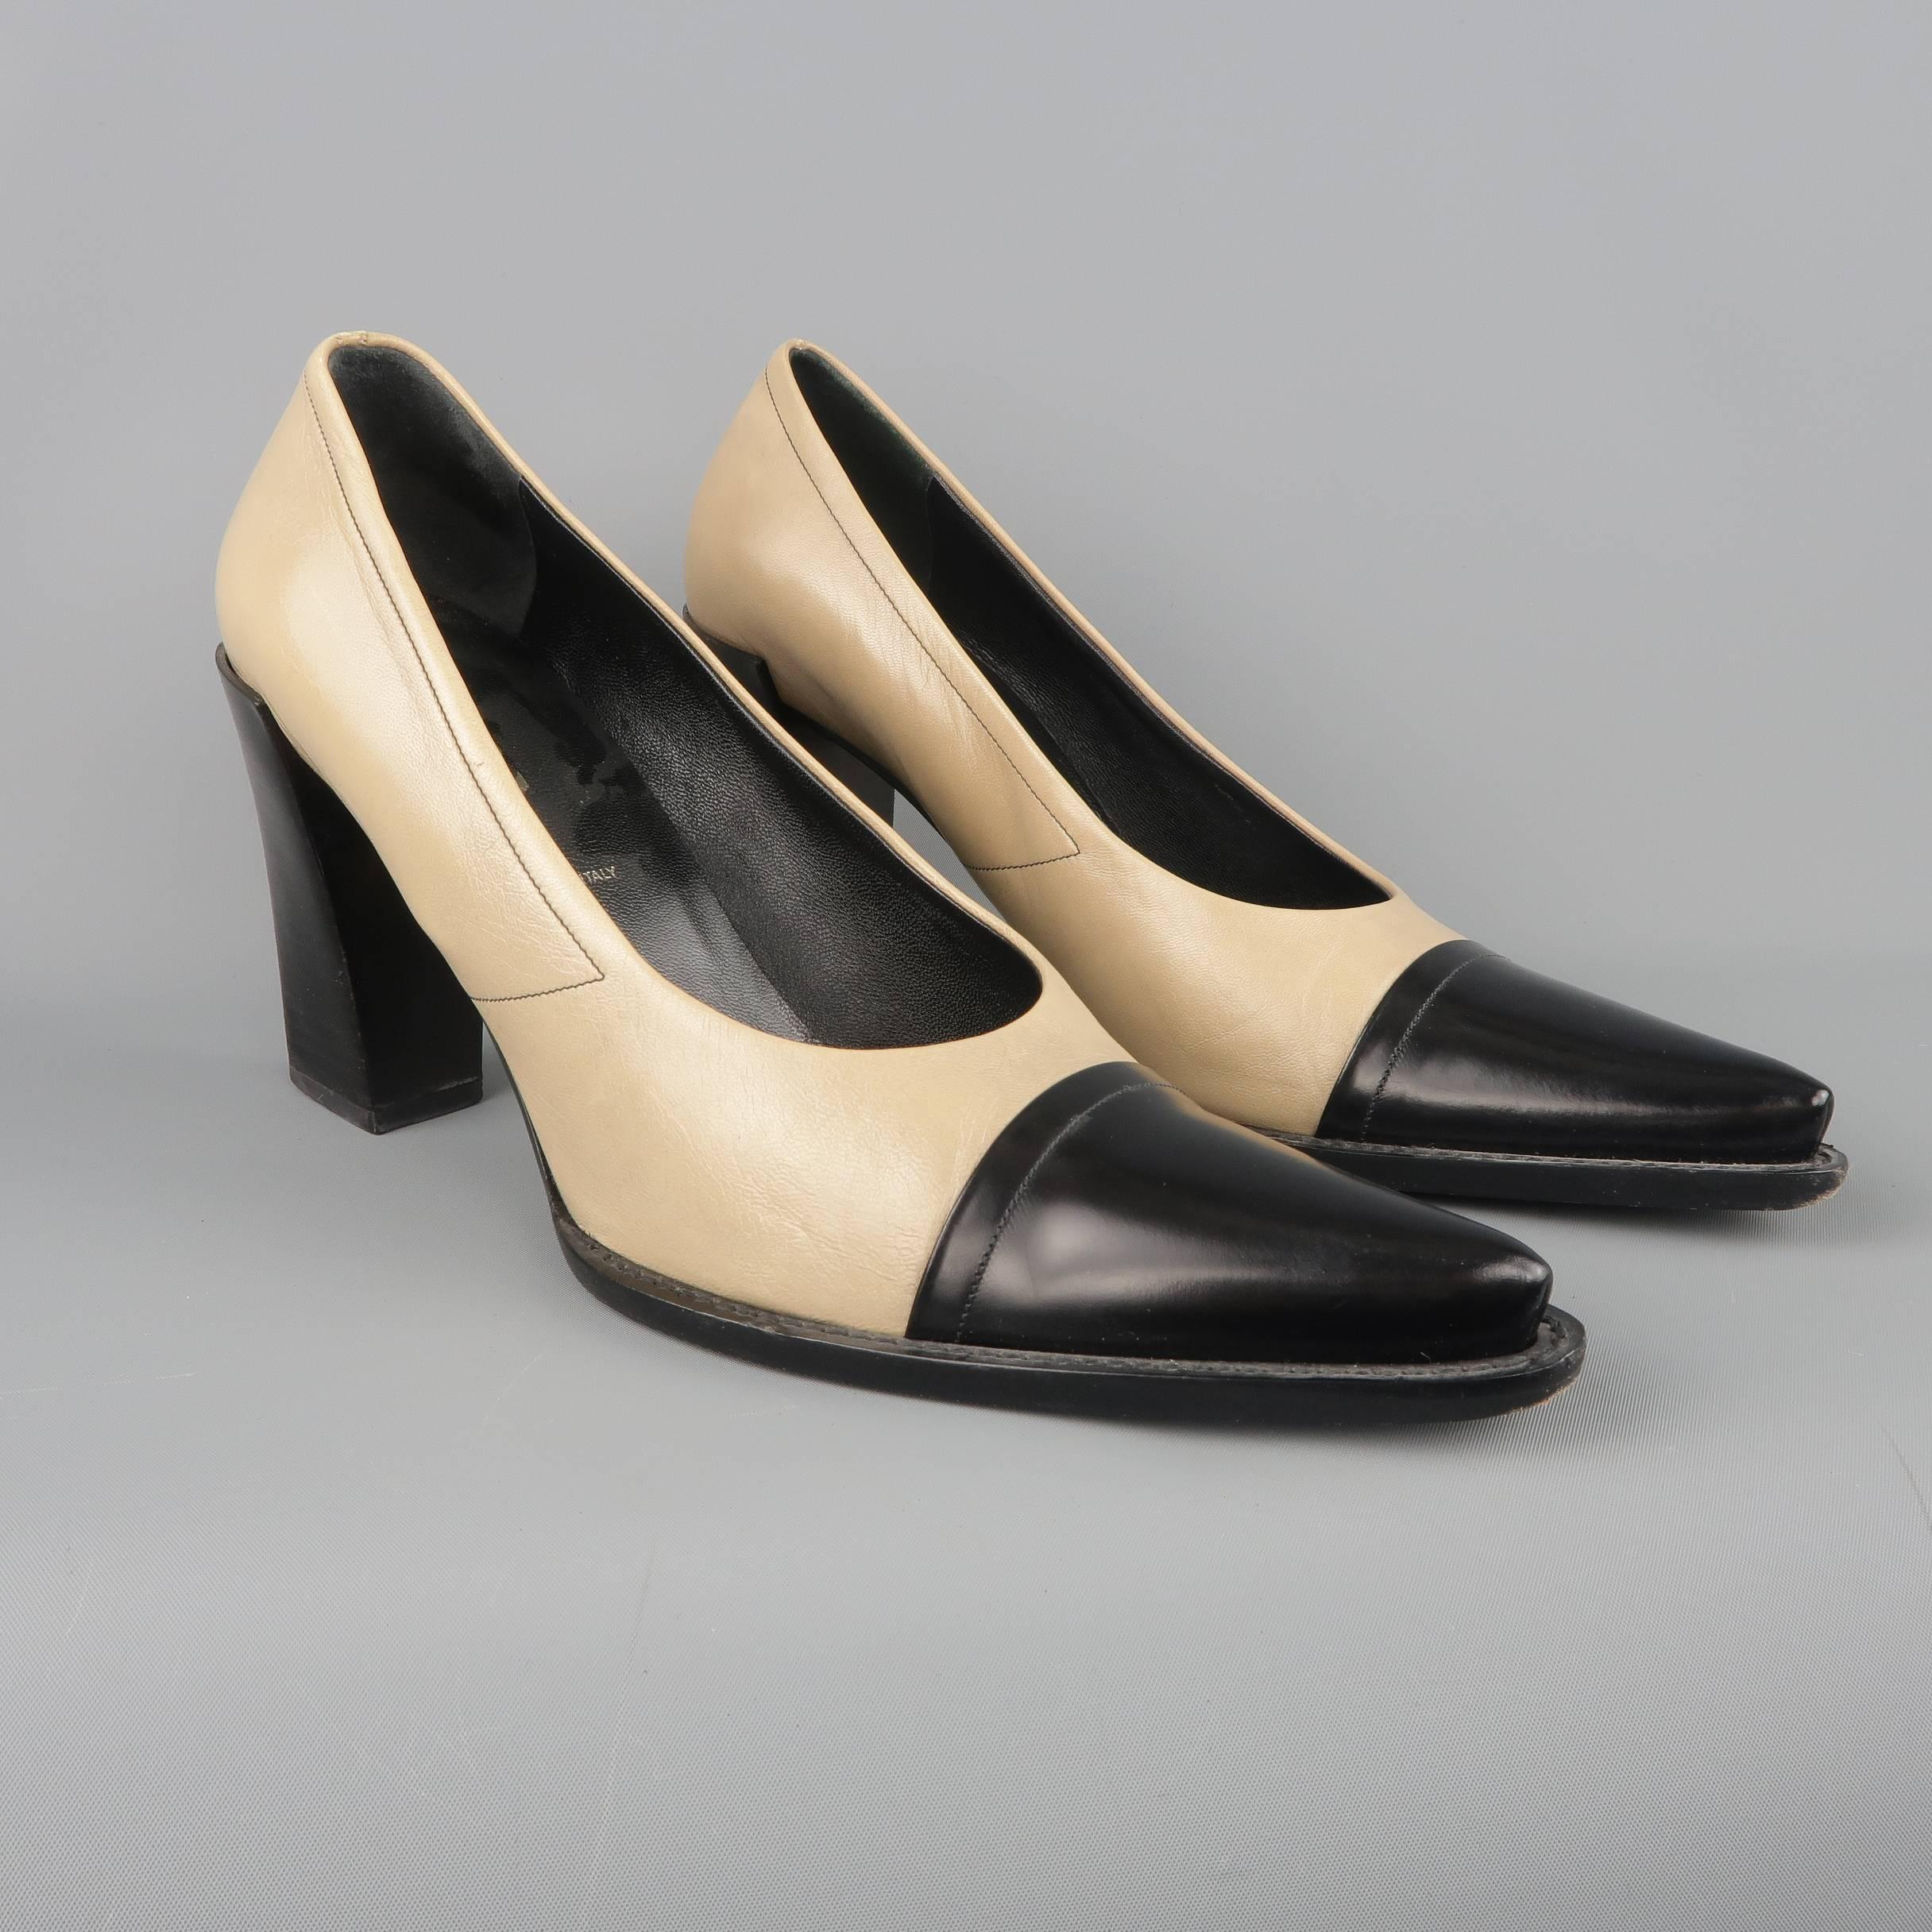 PRADA pumps come in a taupe beige and black leather and feature a pointed cap toe and stacked chunky heel. Minor wear. Made in Italy.
 
Good Pre-Owned Condition.
Marked: IT 40
 
Heel: 3 in.

SKU: 87208